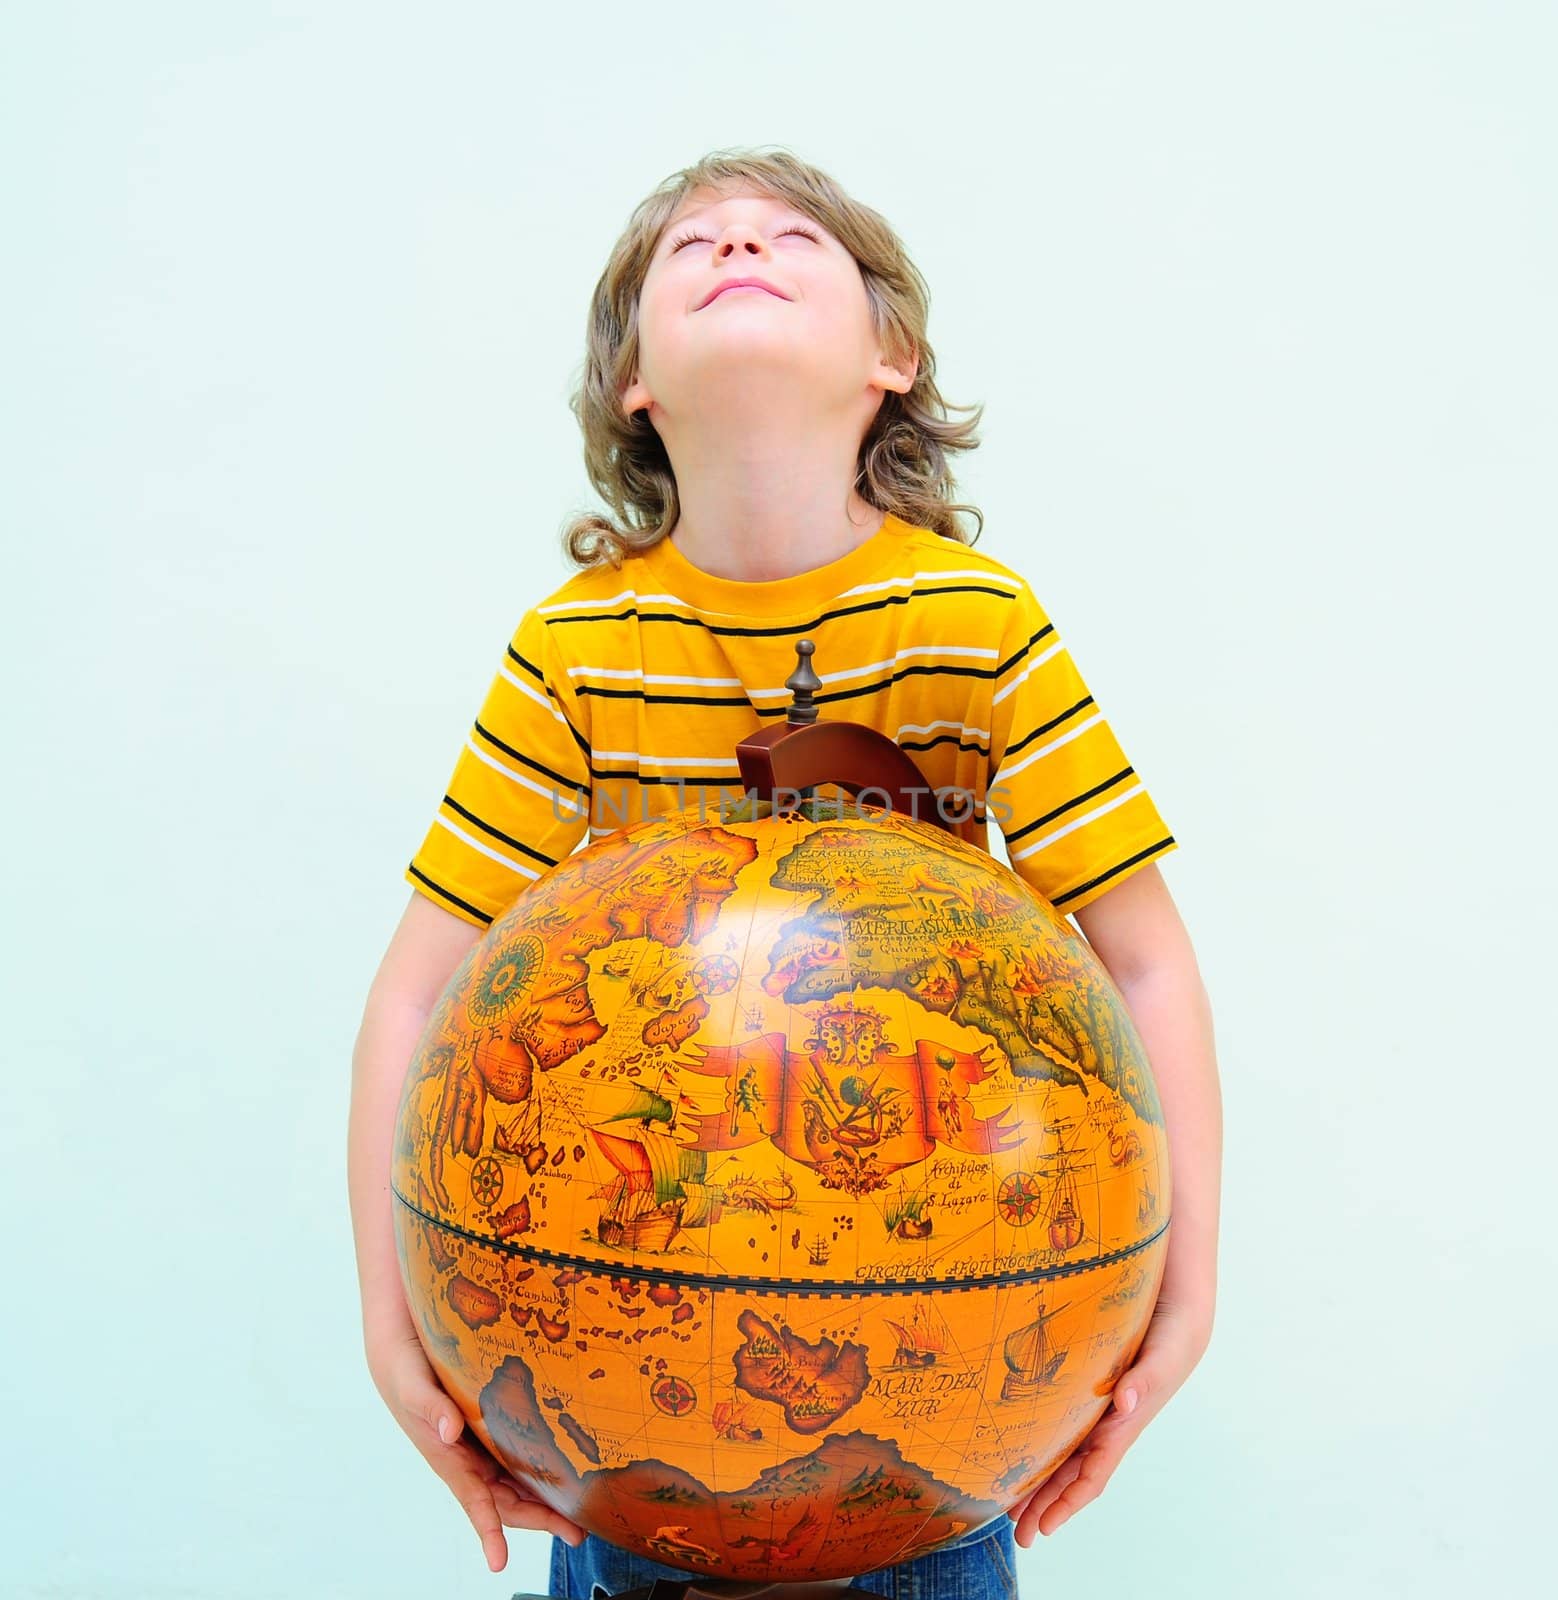 Teen Hugging Old Fashioned Globe Against Light Green Background